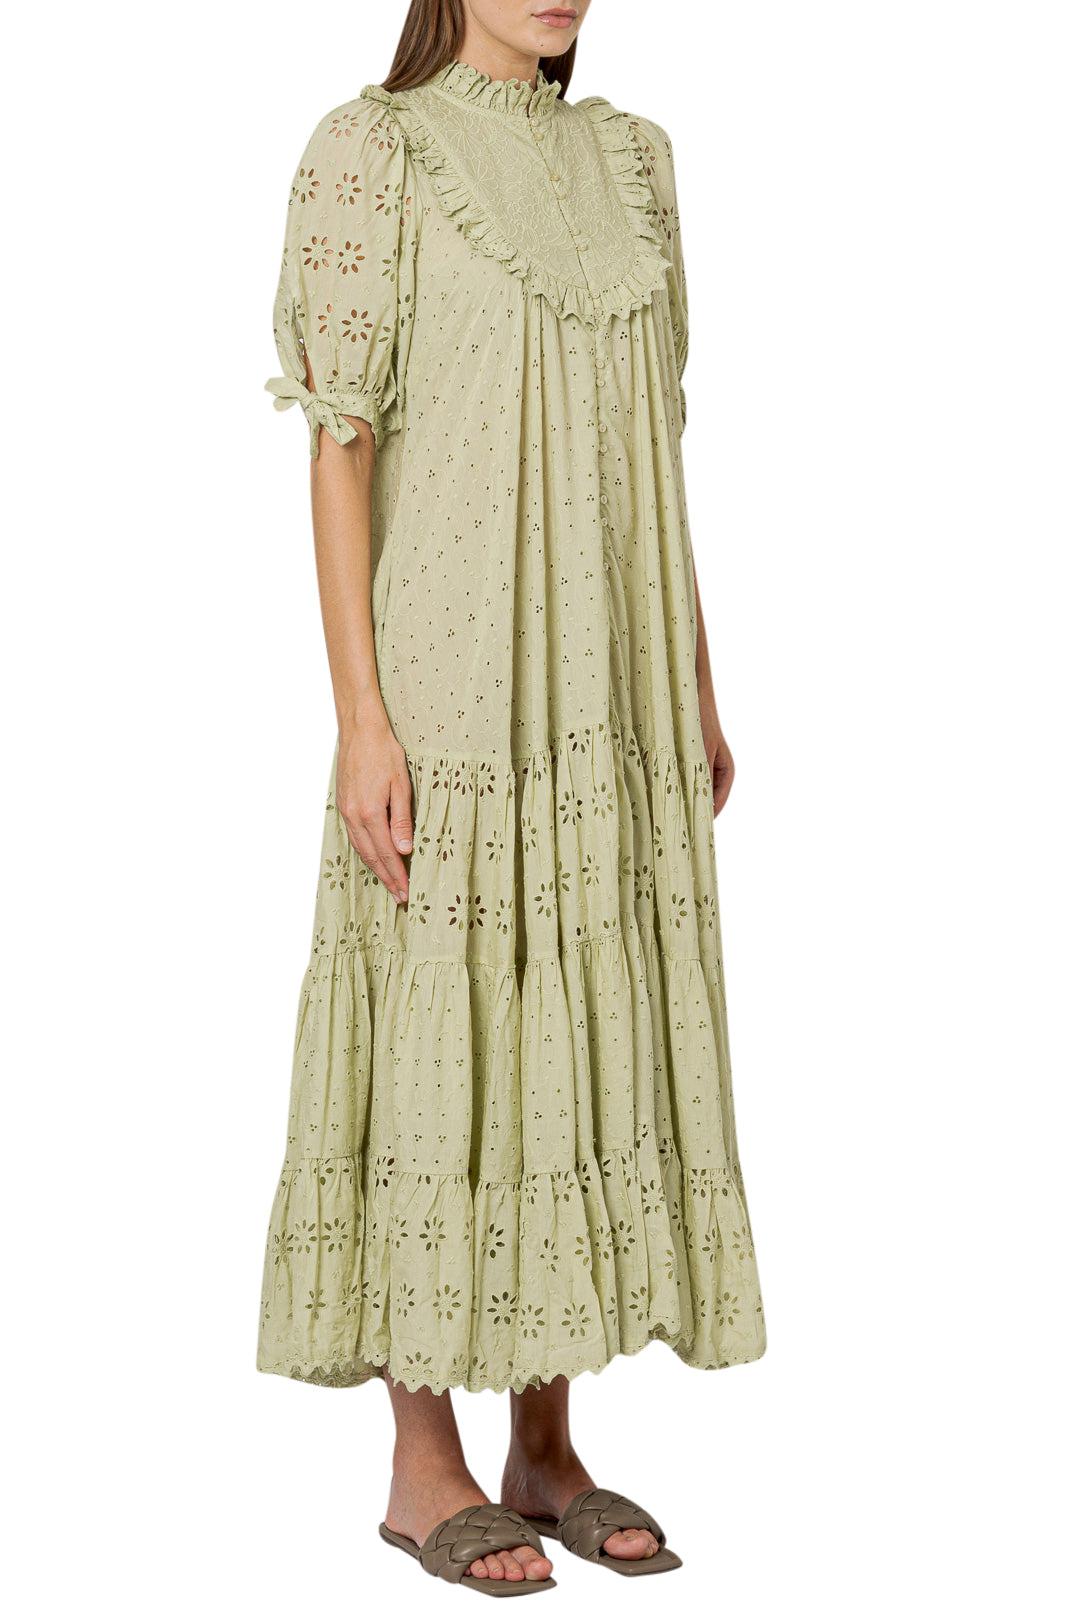 By Timo-Broderie anglaise pleated long dress-2120654-dgallerystore